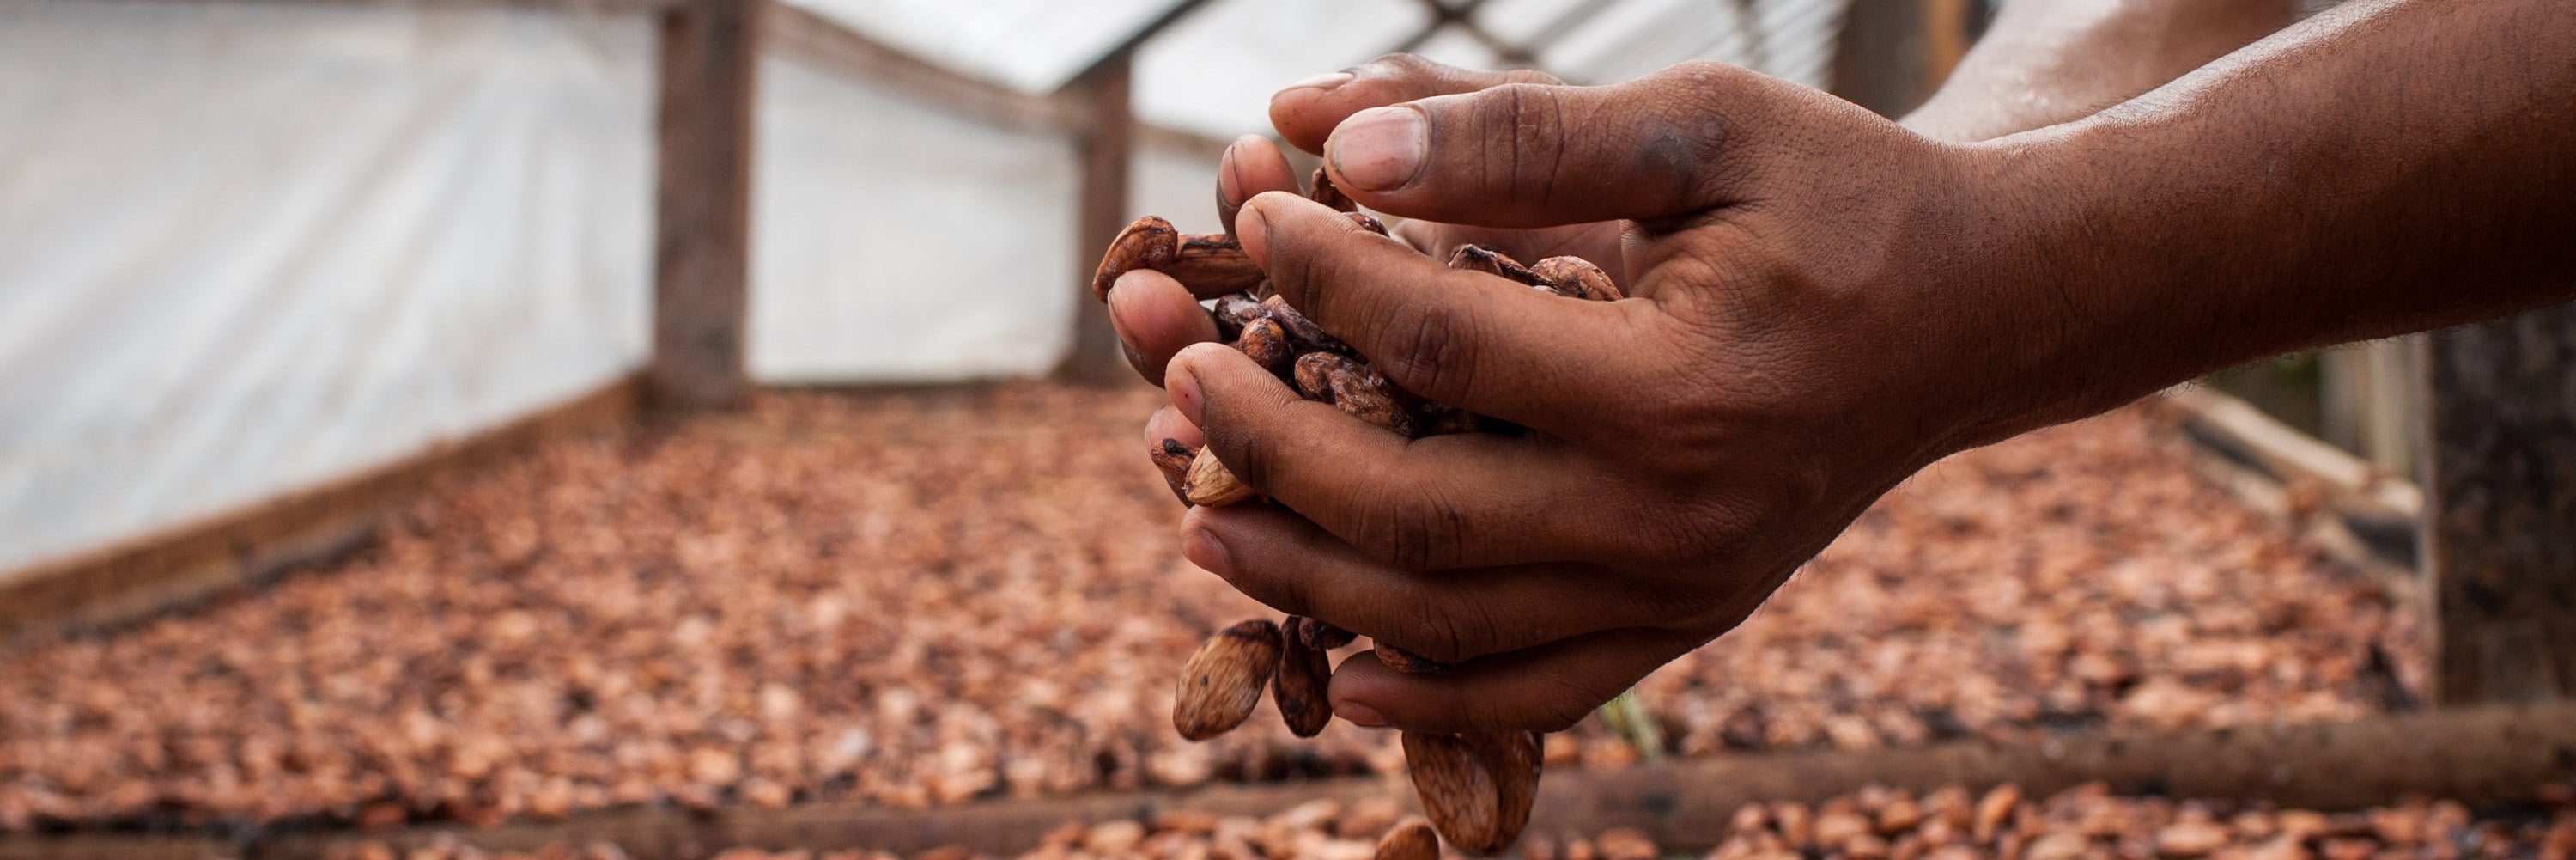 Two hands holding cocoa beans with more cocoa beans in the background